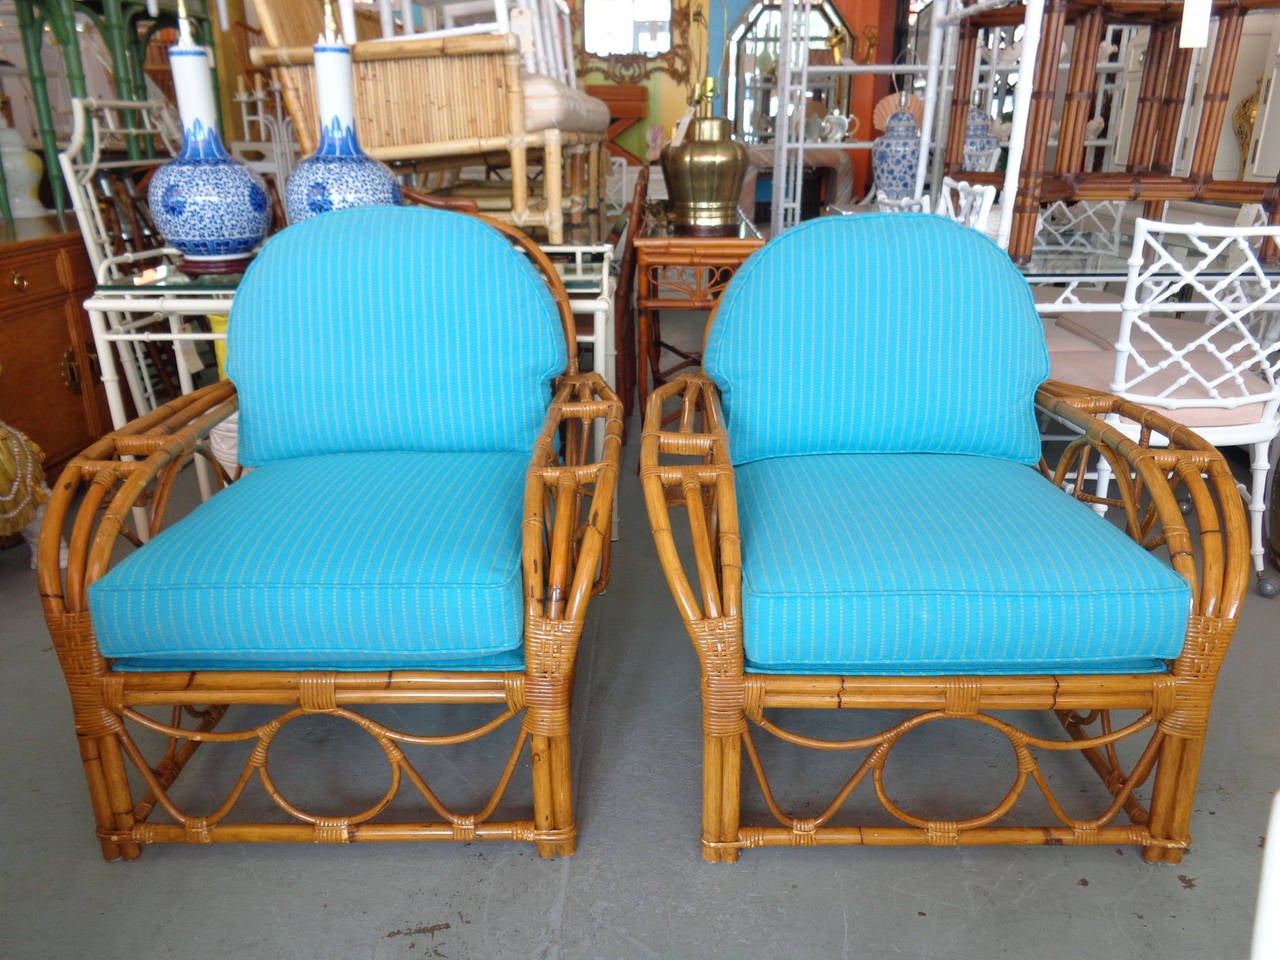 Pair of Stick Wicker Rattan CLUB Chairs in good as found VINTAGE condition. There are minor scuffs, scrapes and chips to the as found restored finish. Minor wear and staining to the as found upholstery.